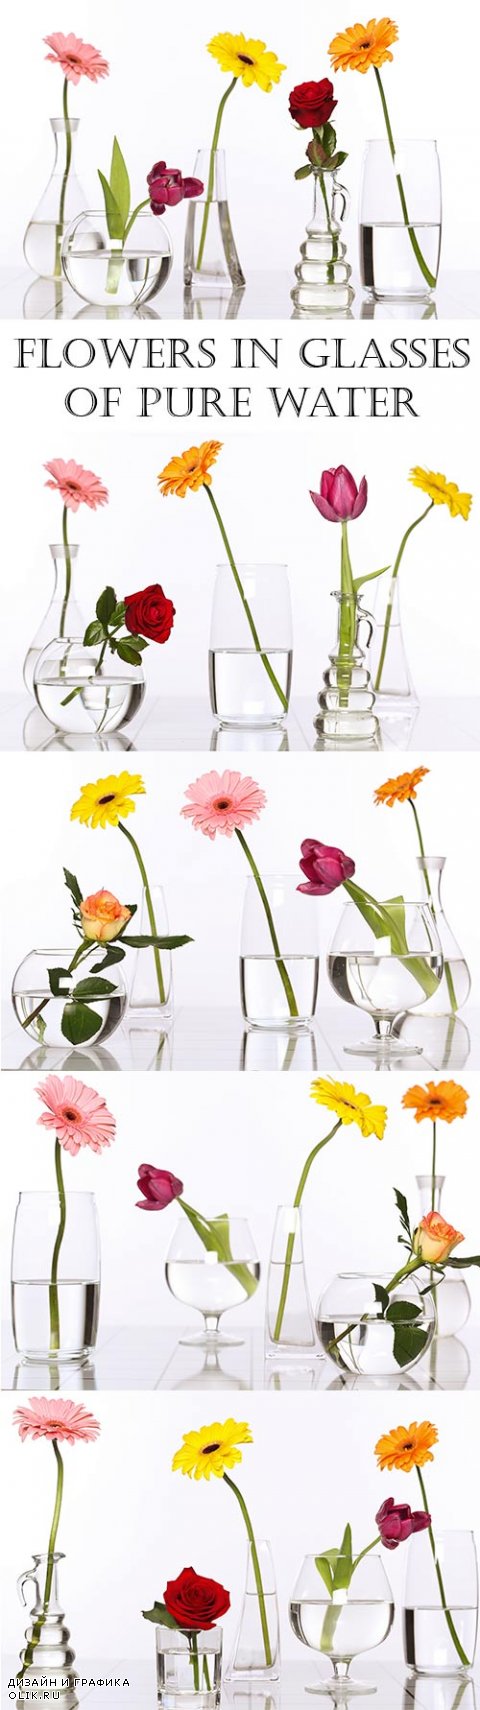 Flowers in glasses of pure water